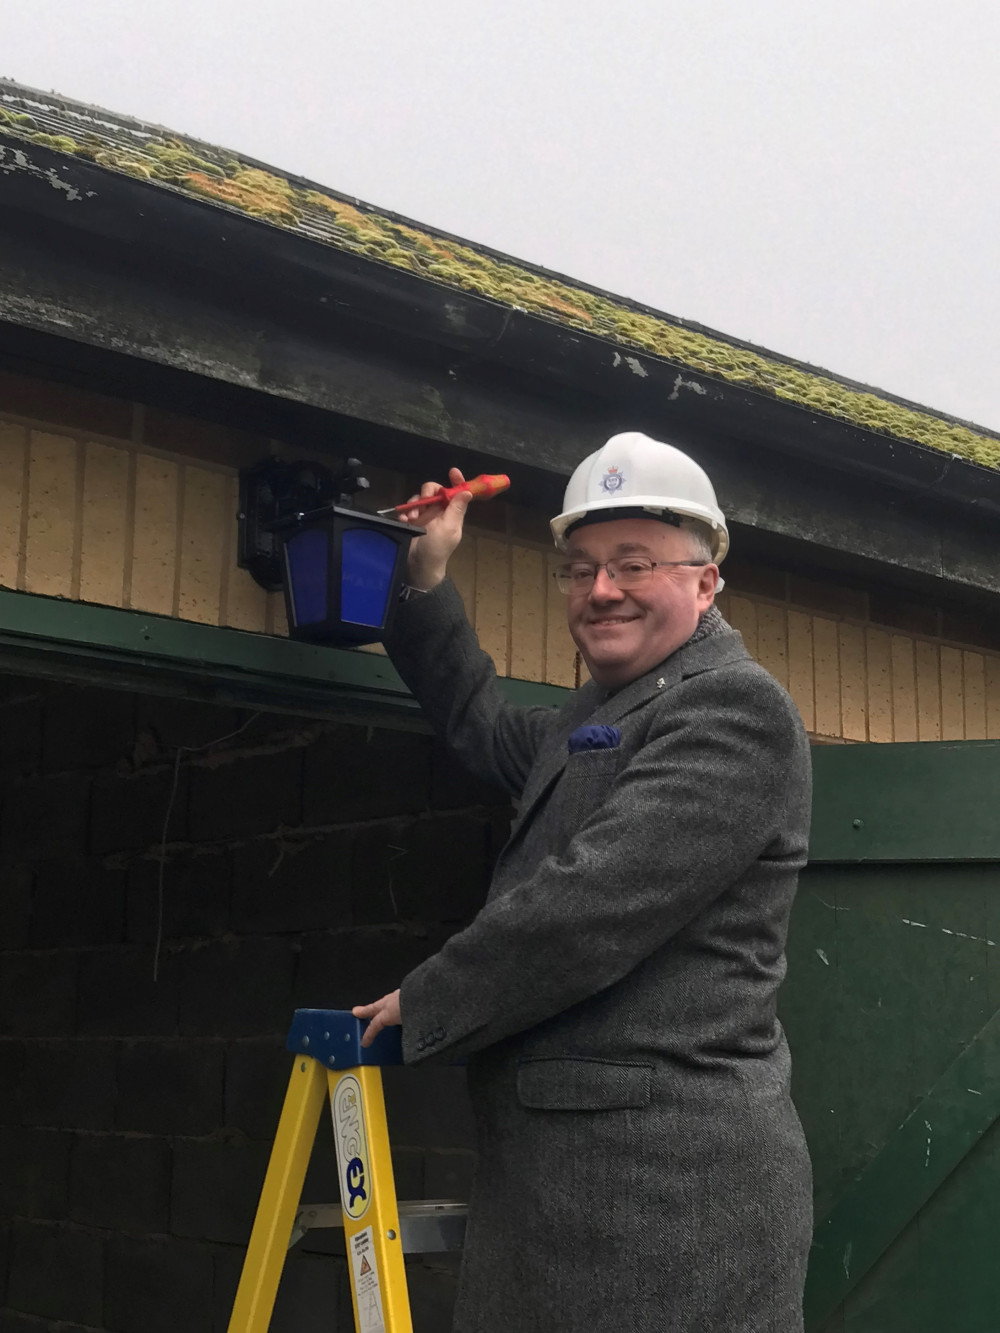 Rupert Matthews inspecting the fitting of one of the new blue lamps. Image credit: PCC Rupert Matthews.